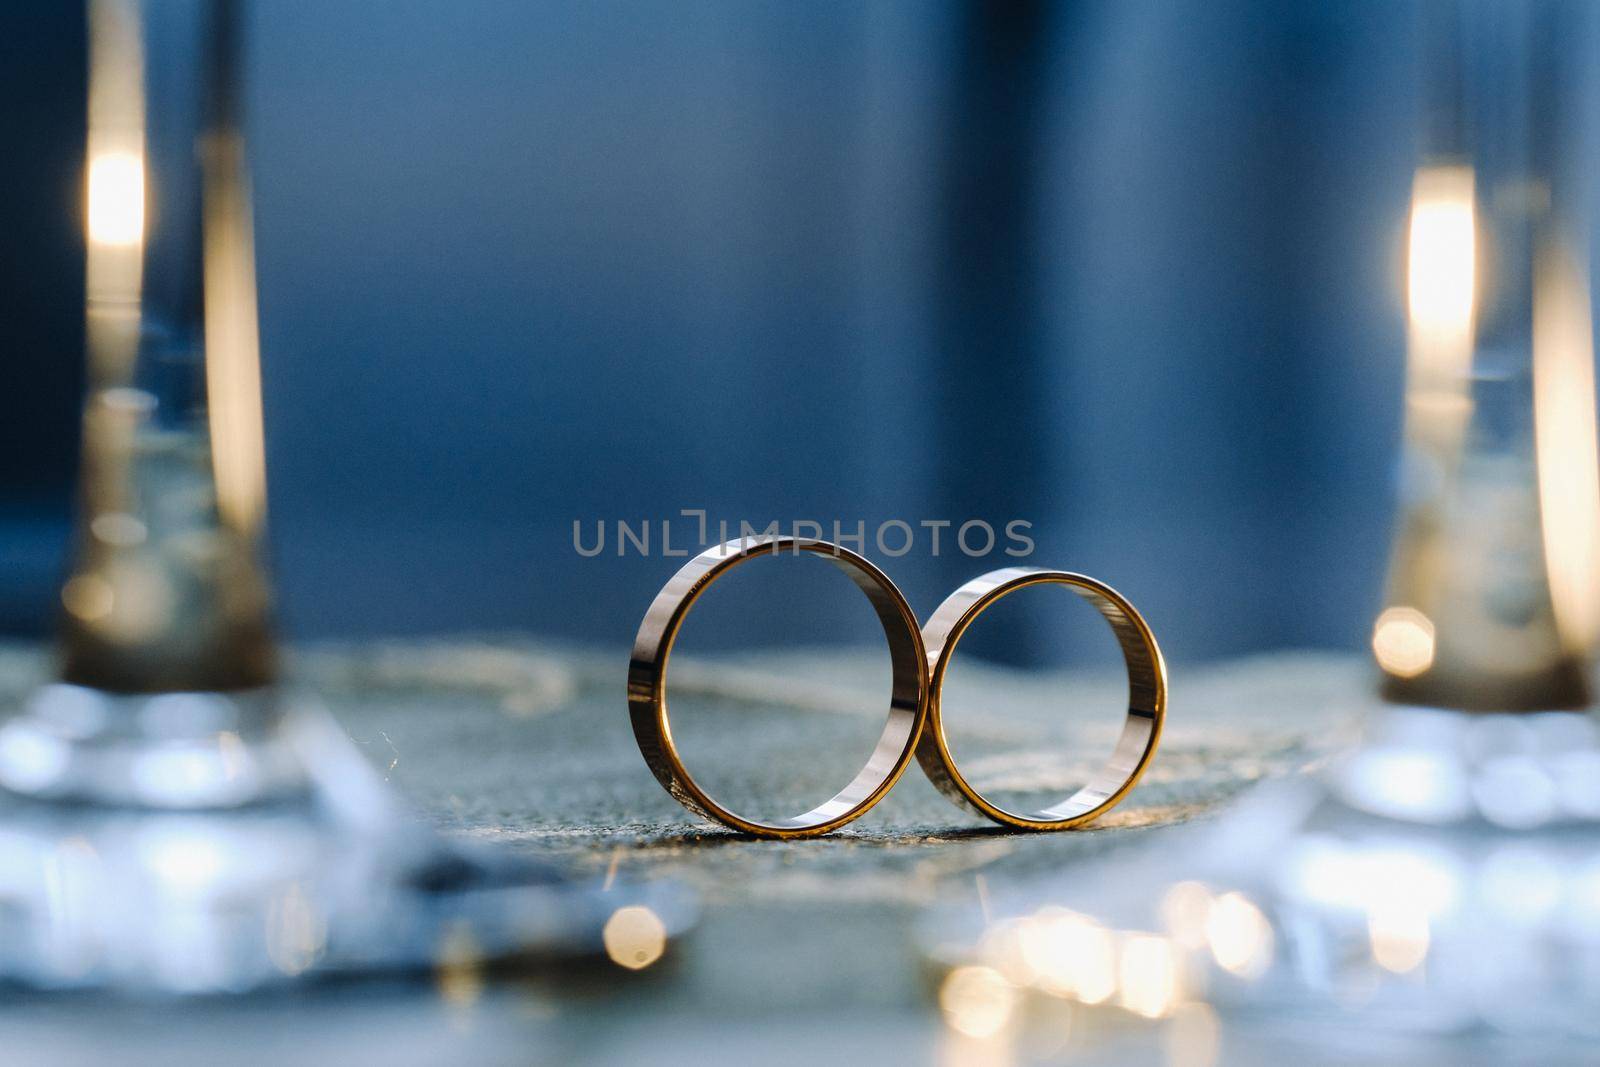 A pair of gold wedding rings.Two wedding rings.